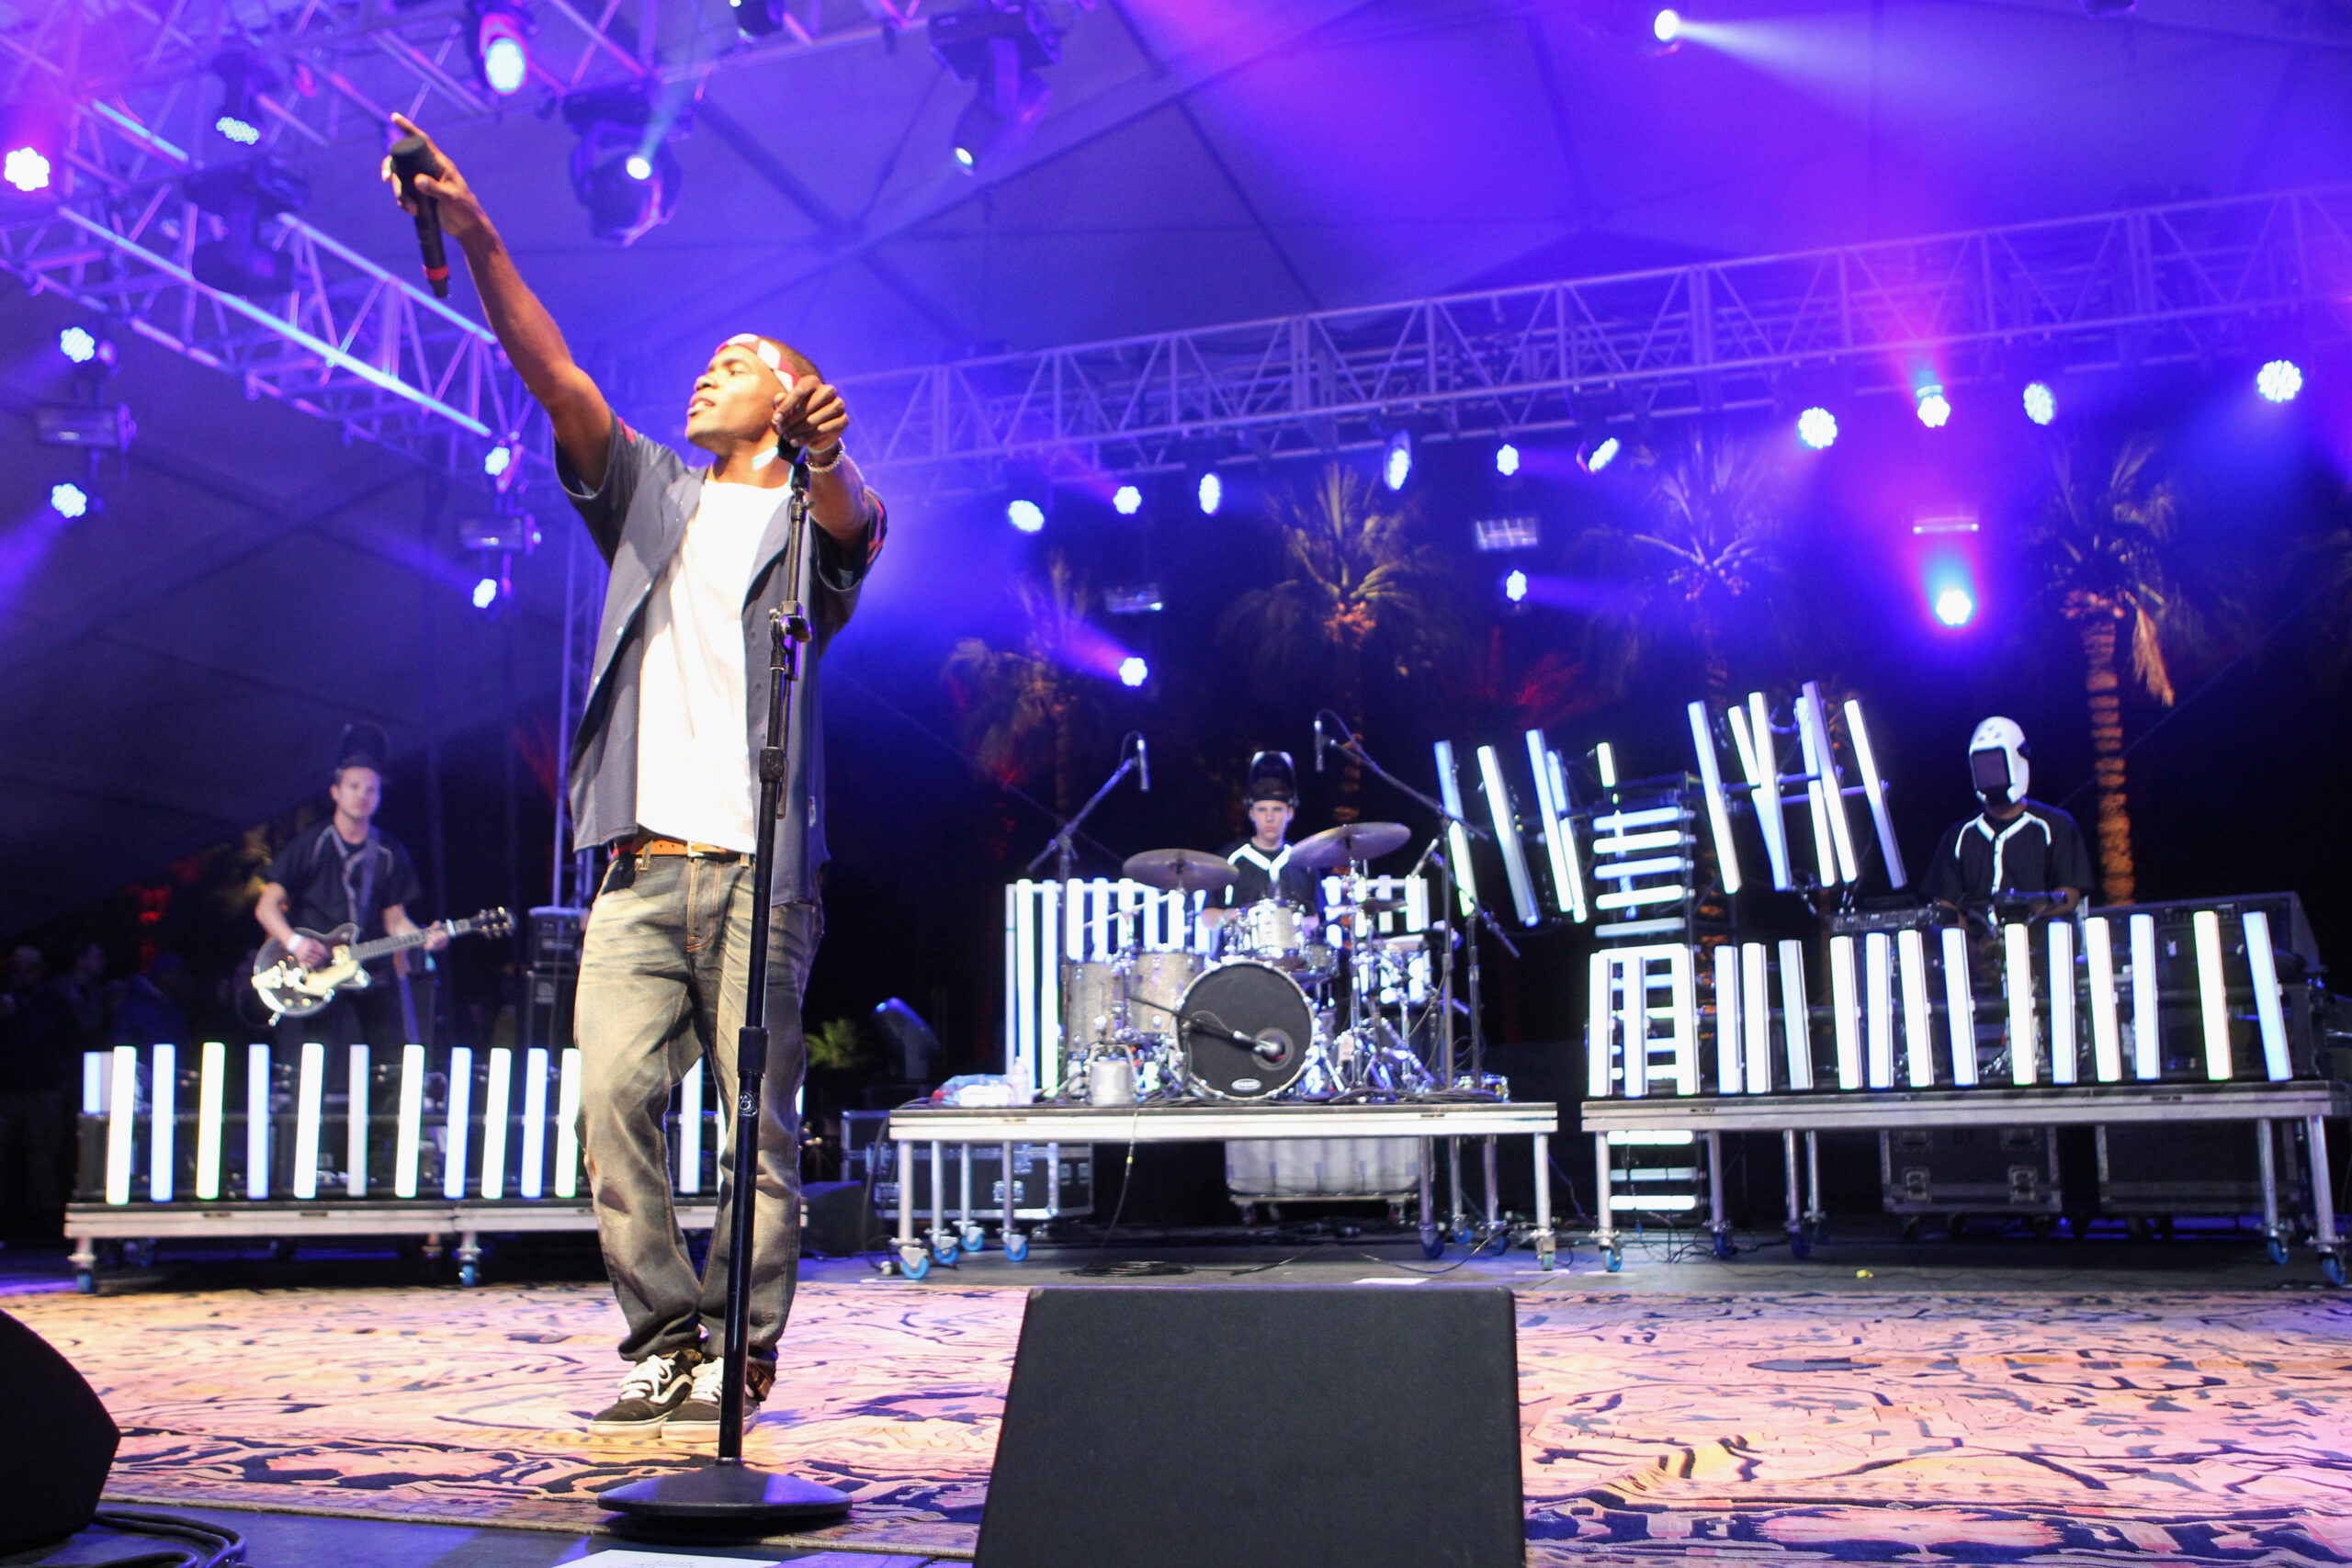 INDIO, CA - APRIL 13:  Singer Frank Ocean performs onstage at the 2012 Coachella Valley Music & Arts Festival held at The Empire Polo Field on April 13, 2012 in Indio, California.  (Photo by Karl Walter/Getty Images for Coachella)